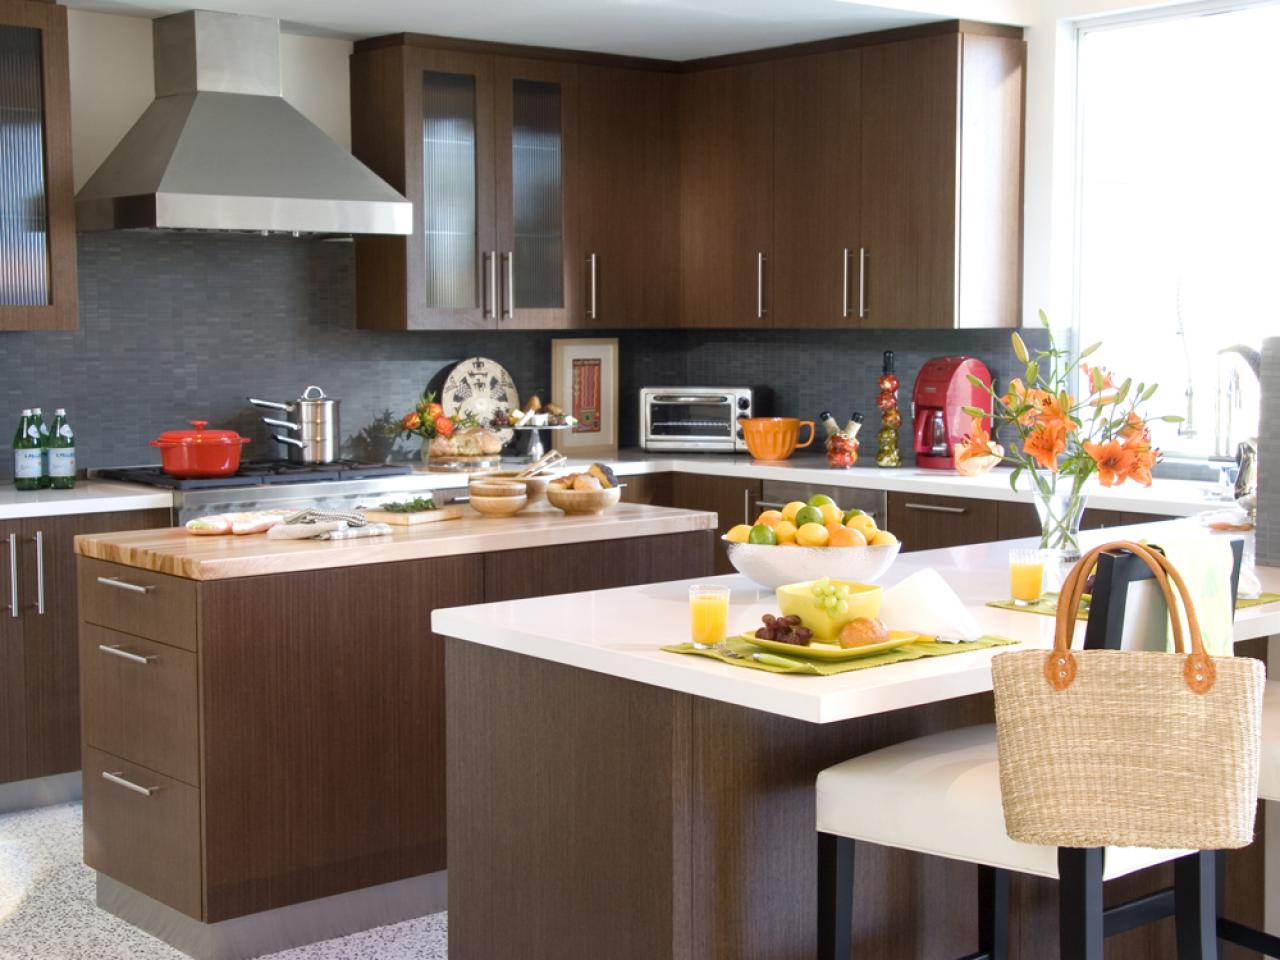 Cheap Kitchen Cabinets Pictures, Options, Tips & Ideas   HGTV